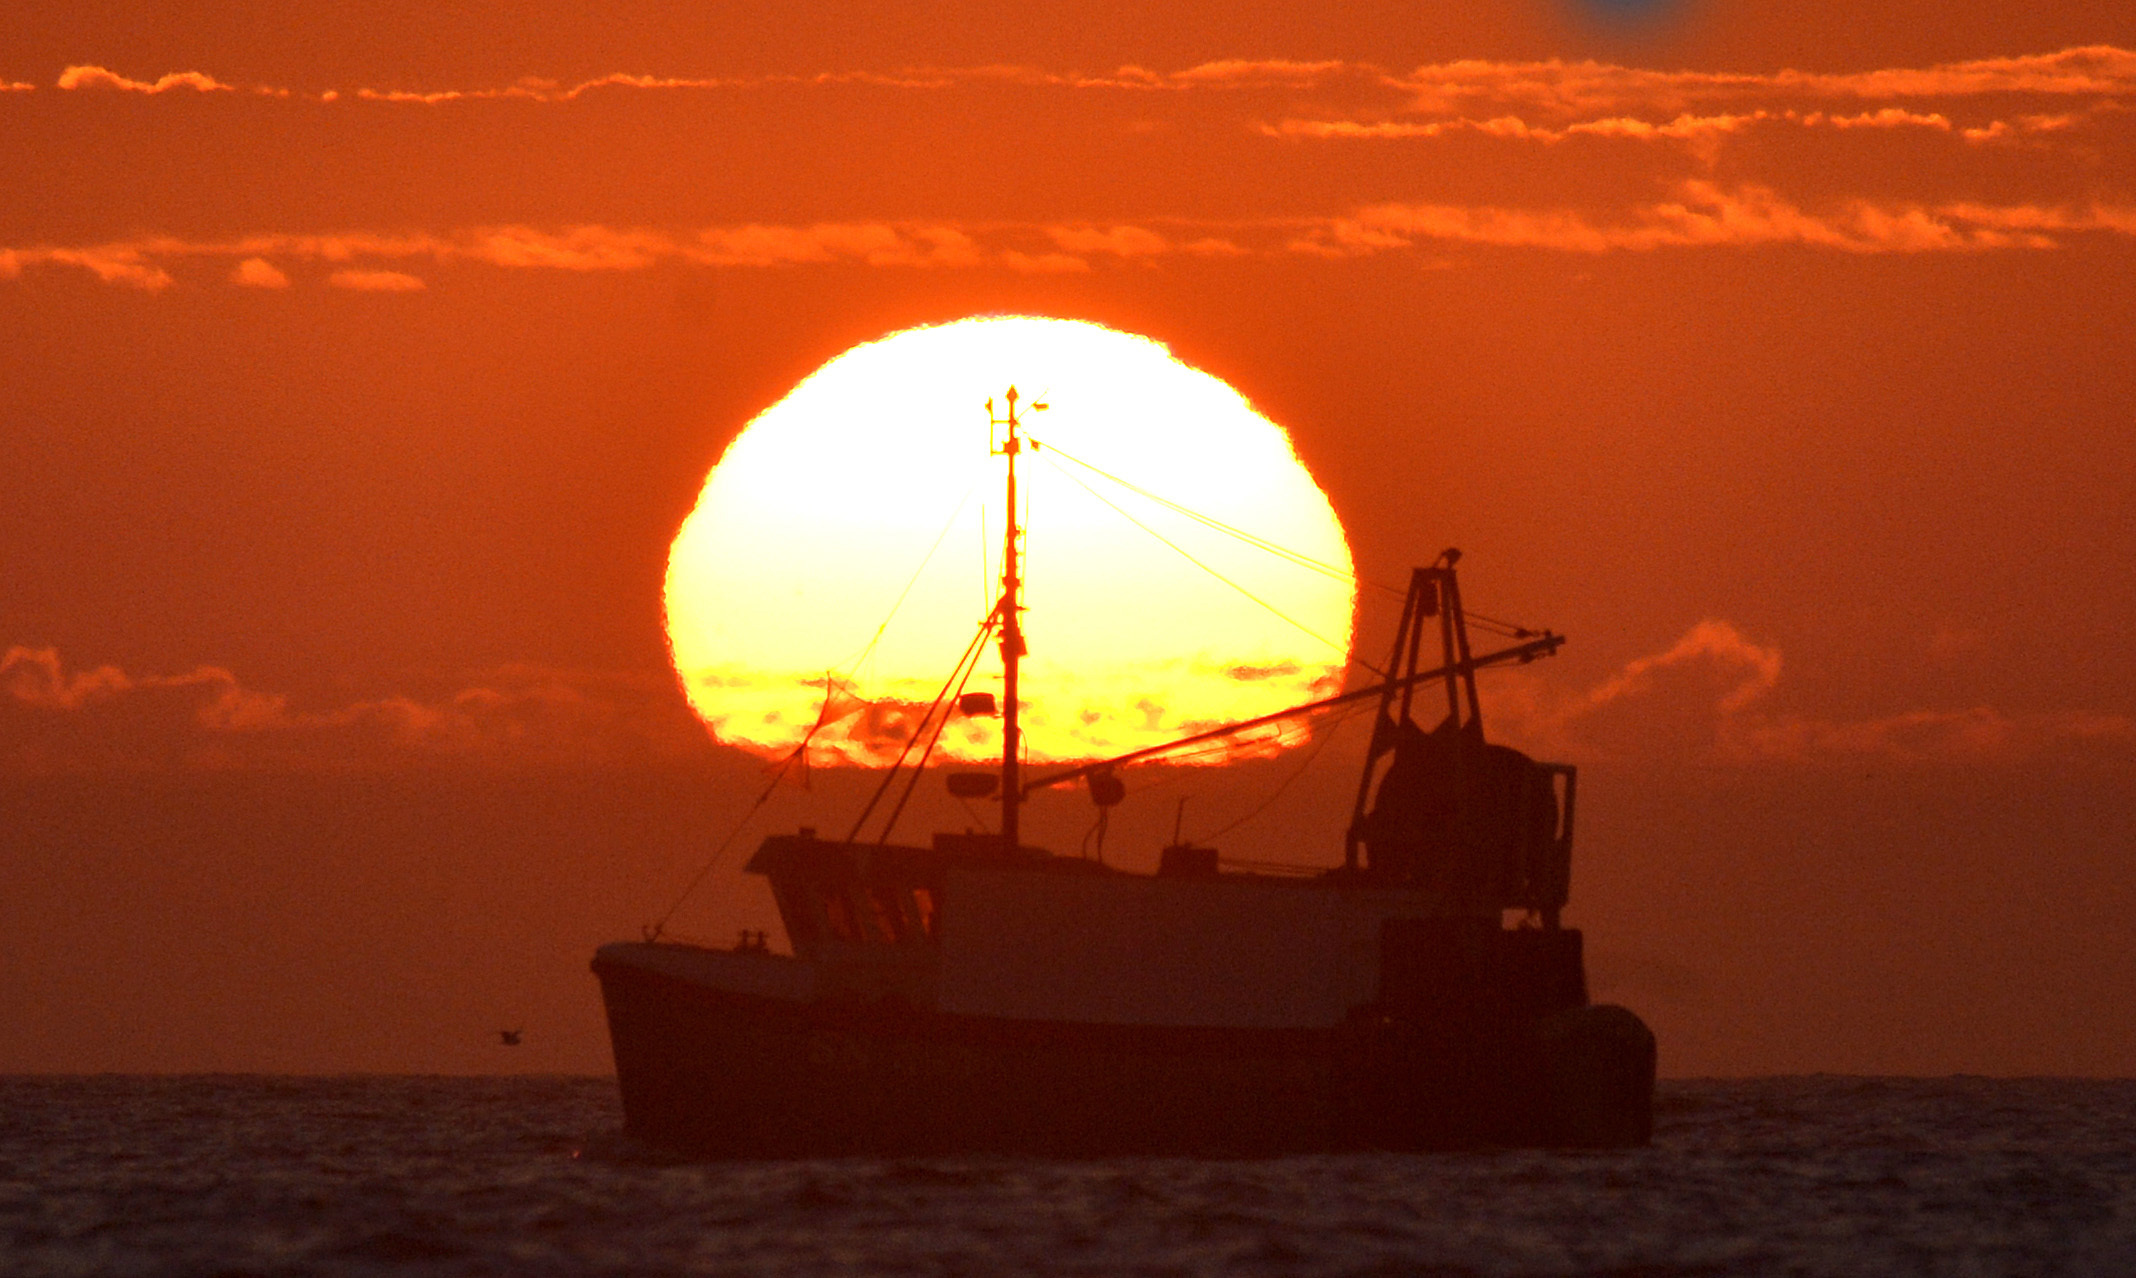 The sun rises over fishermen setting off for a day's fishing on the North Sea.